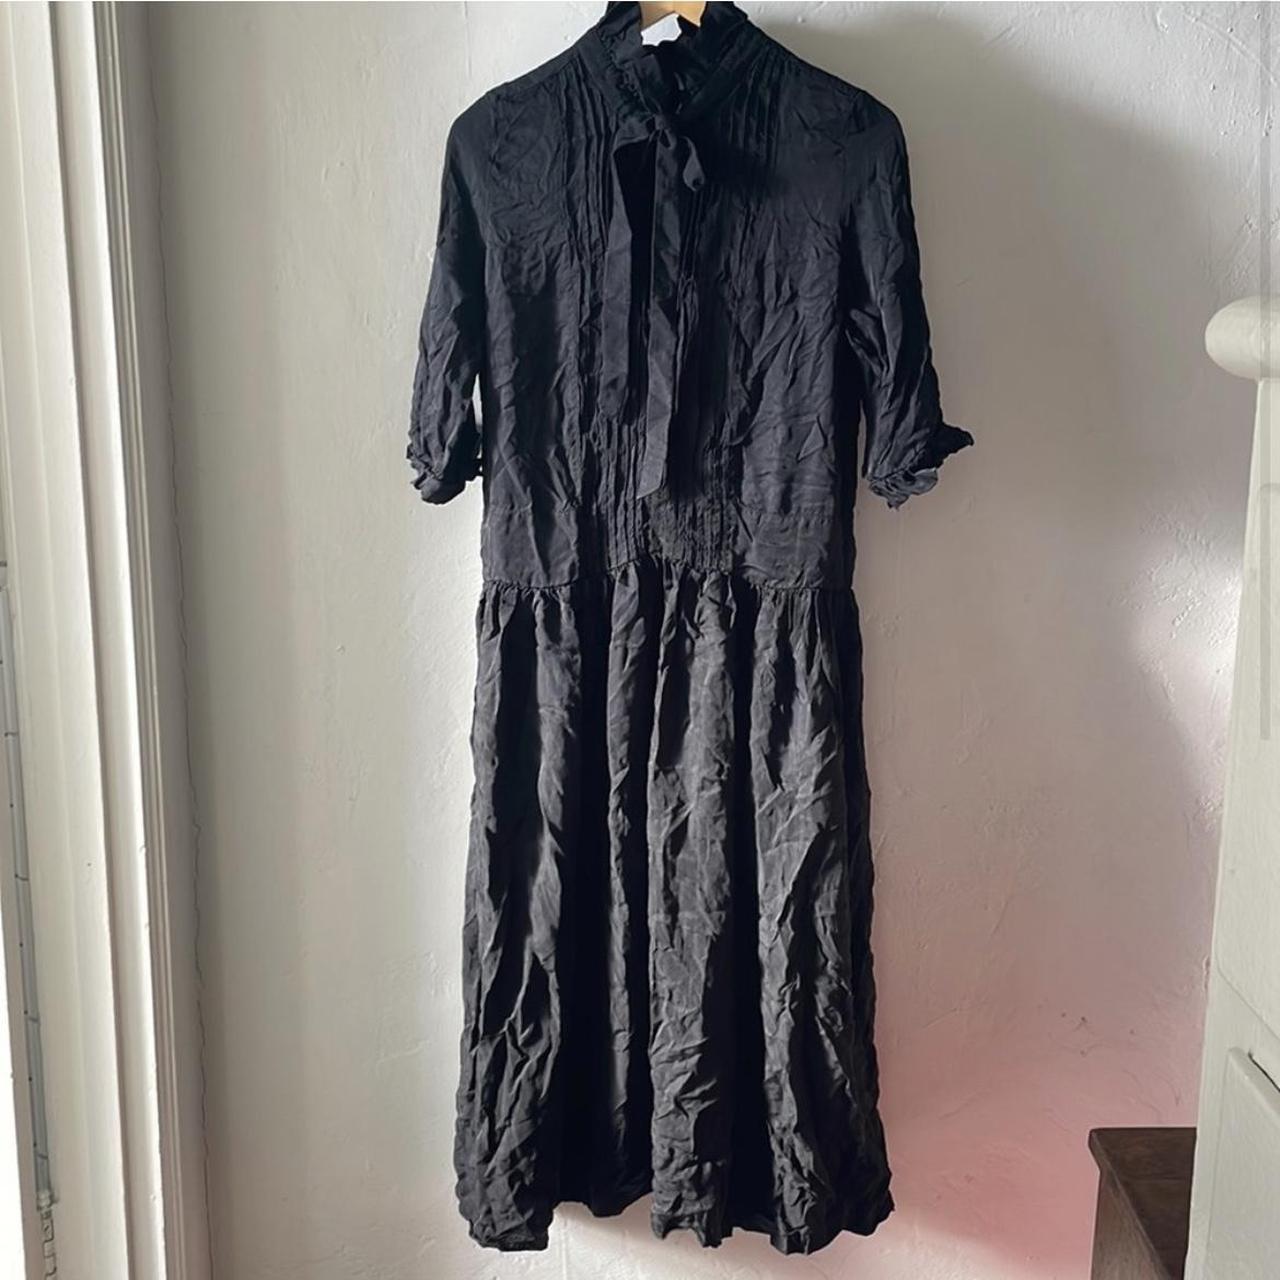 Suzanne Rae dress-rare, the brand only makes shoes... - Depop